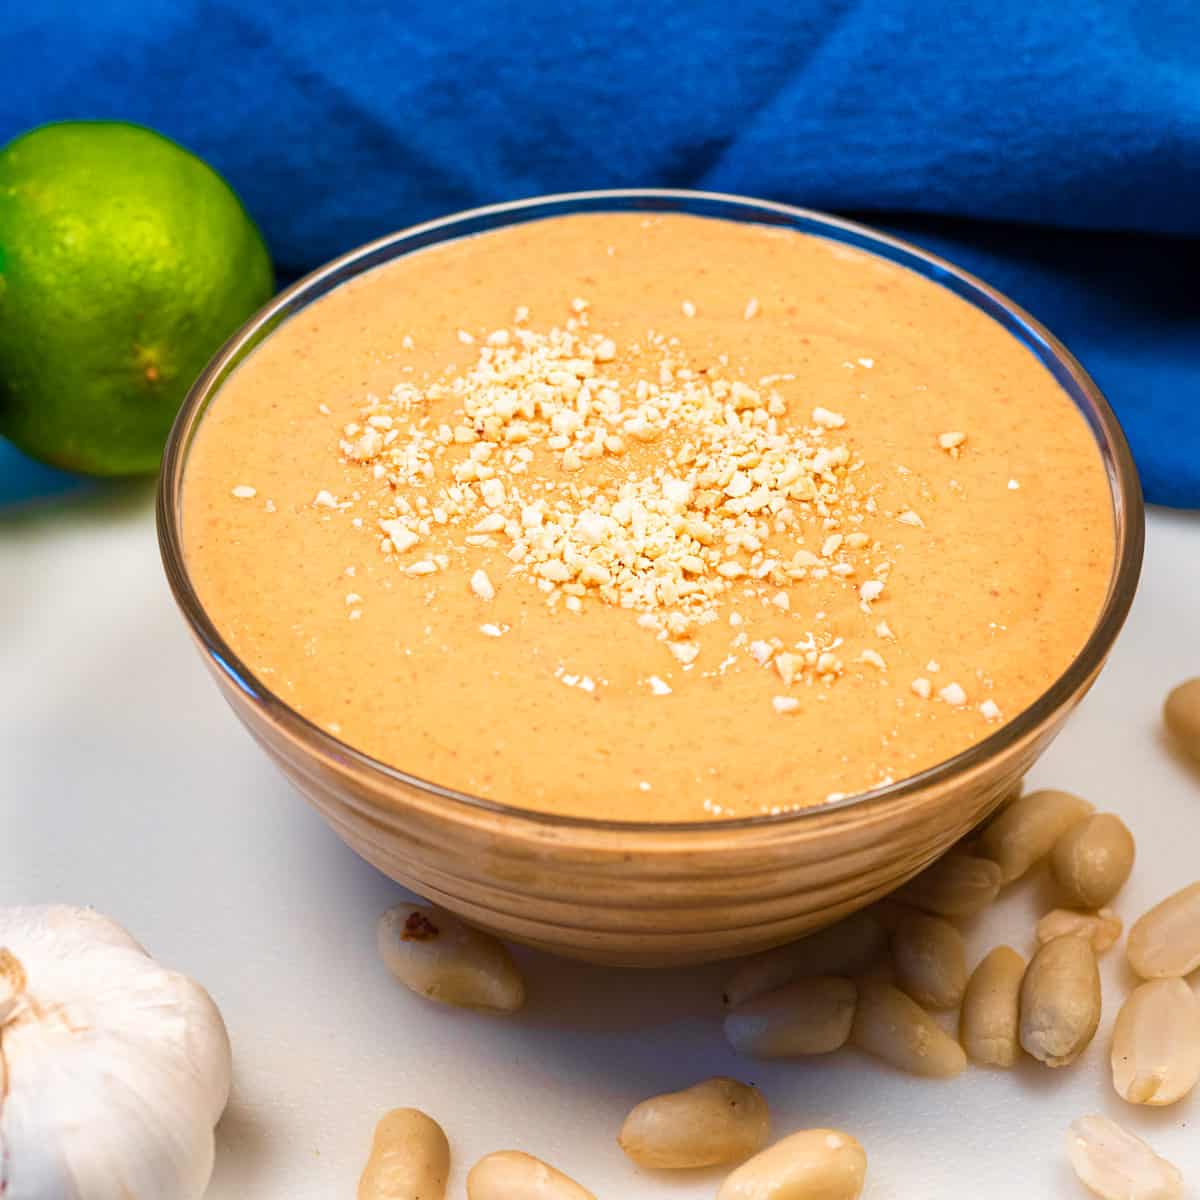 Peanut sauce in a dish with peanut laid around it, a lime, and clove of garlic.